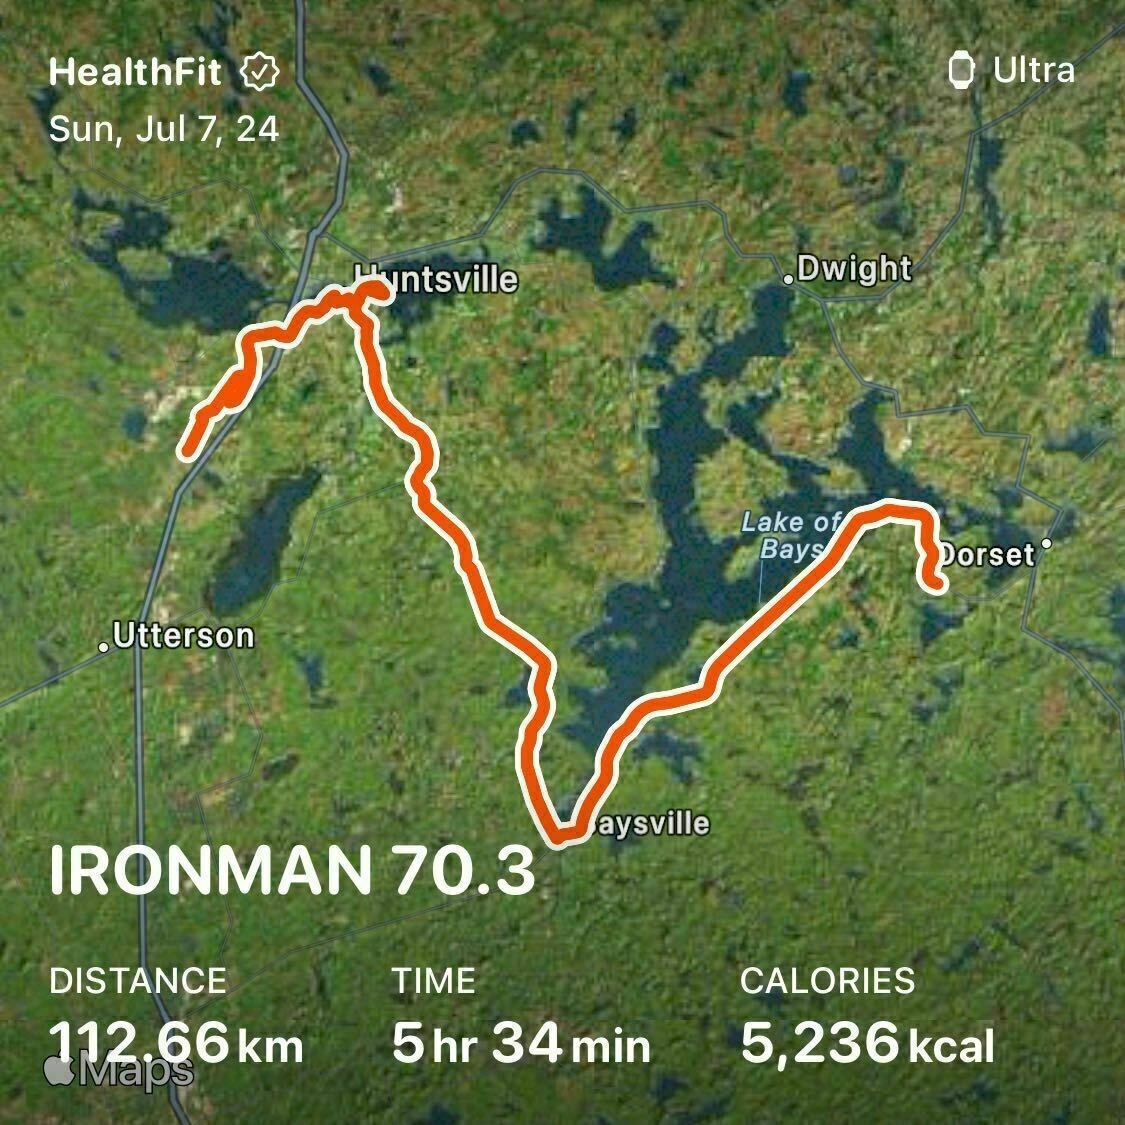 Auto-generated description: A map displays a triathlon route in the Huntsville area with details on distance (112.66 km), time (5 hours 34 minutes), and calories burned (5,236 kcal).